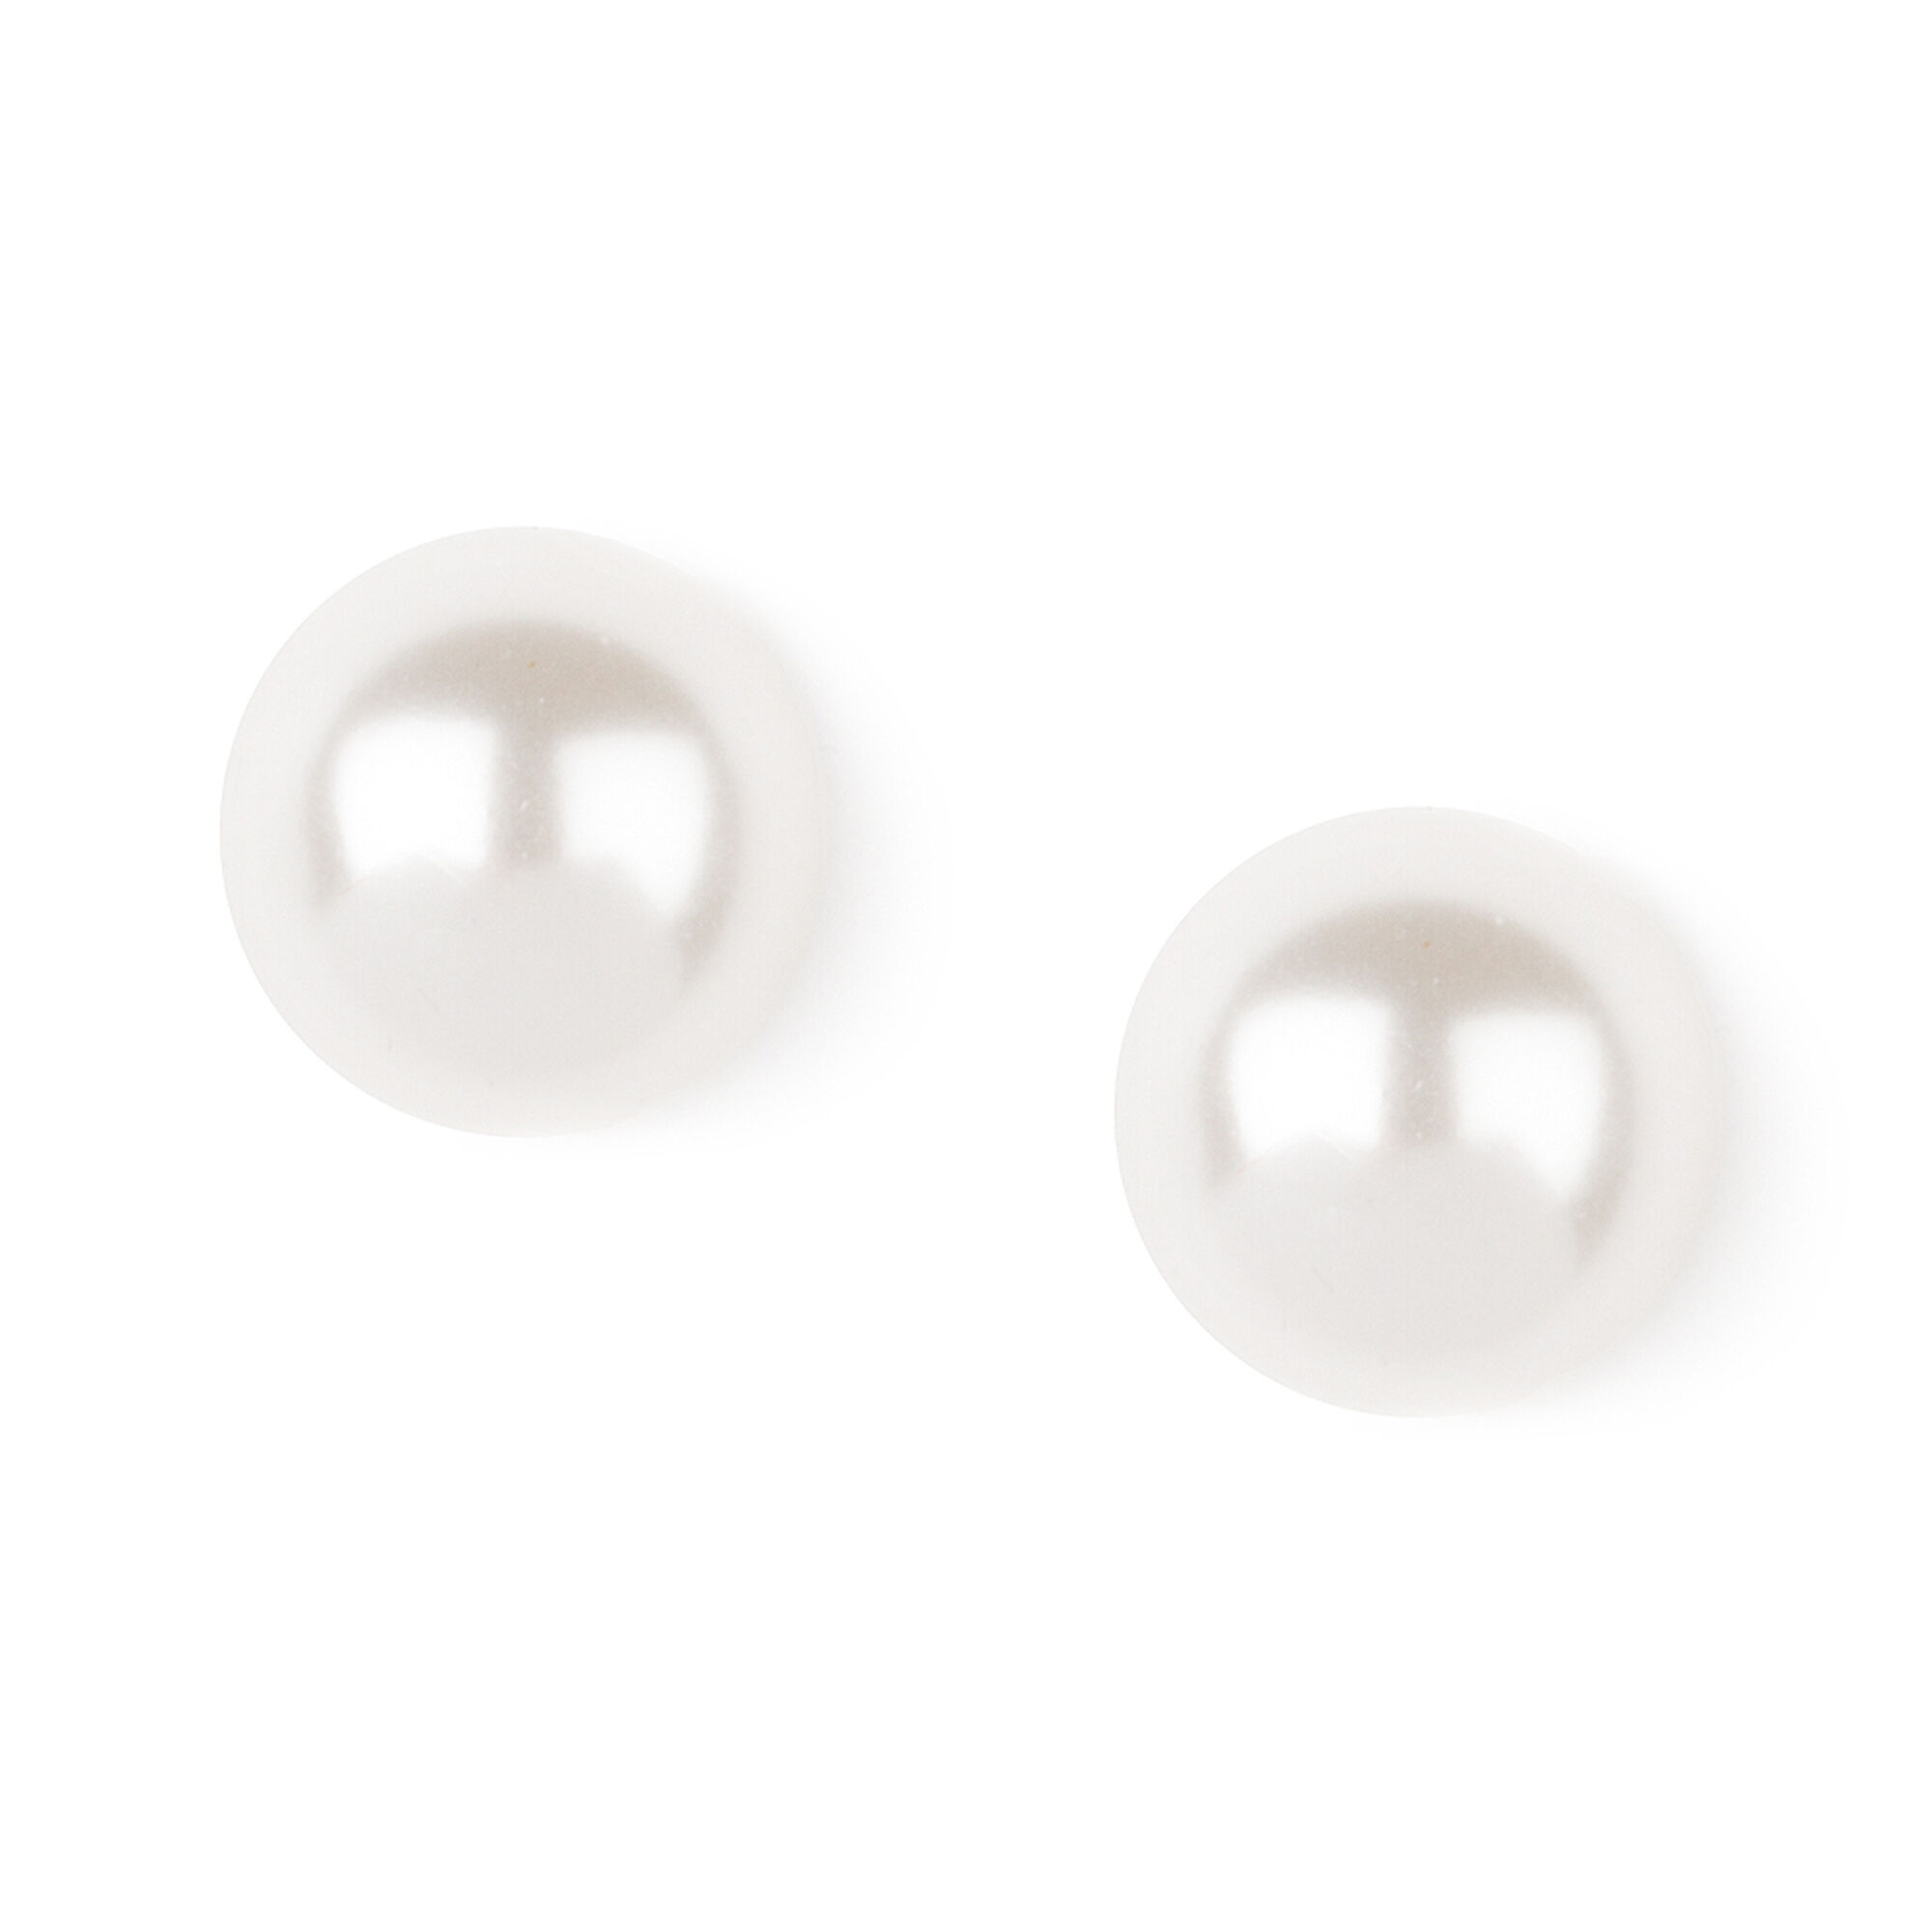 1930s Art Deco Style Jewelry – Costume Jewelry Icing 10MM Pearl Stud Earrings - White $7.99 AT vintagedancer.com